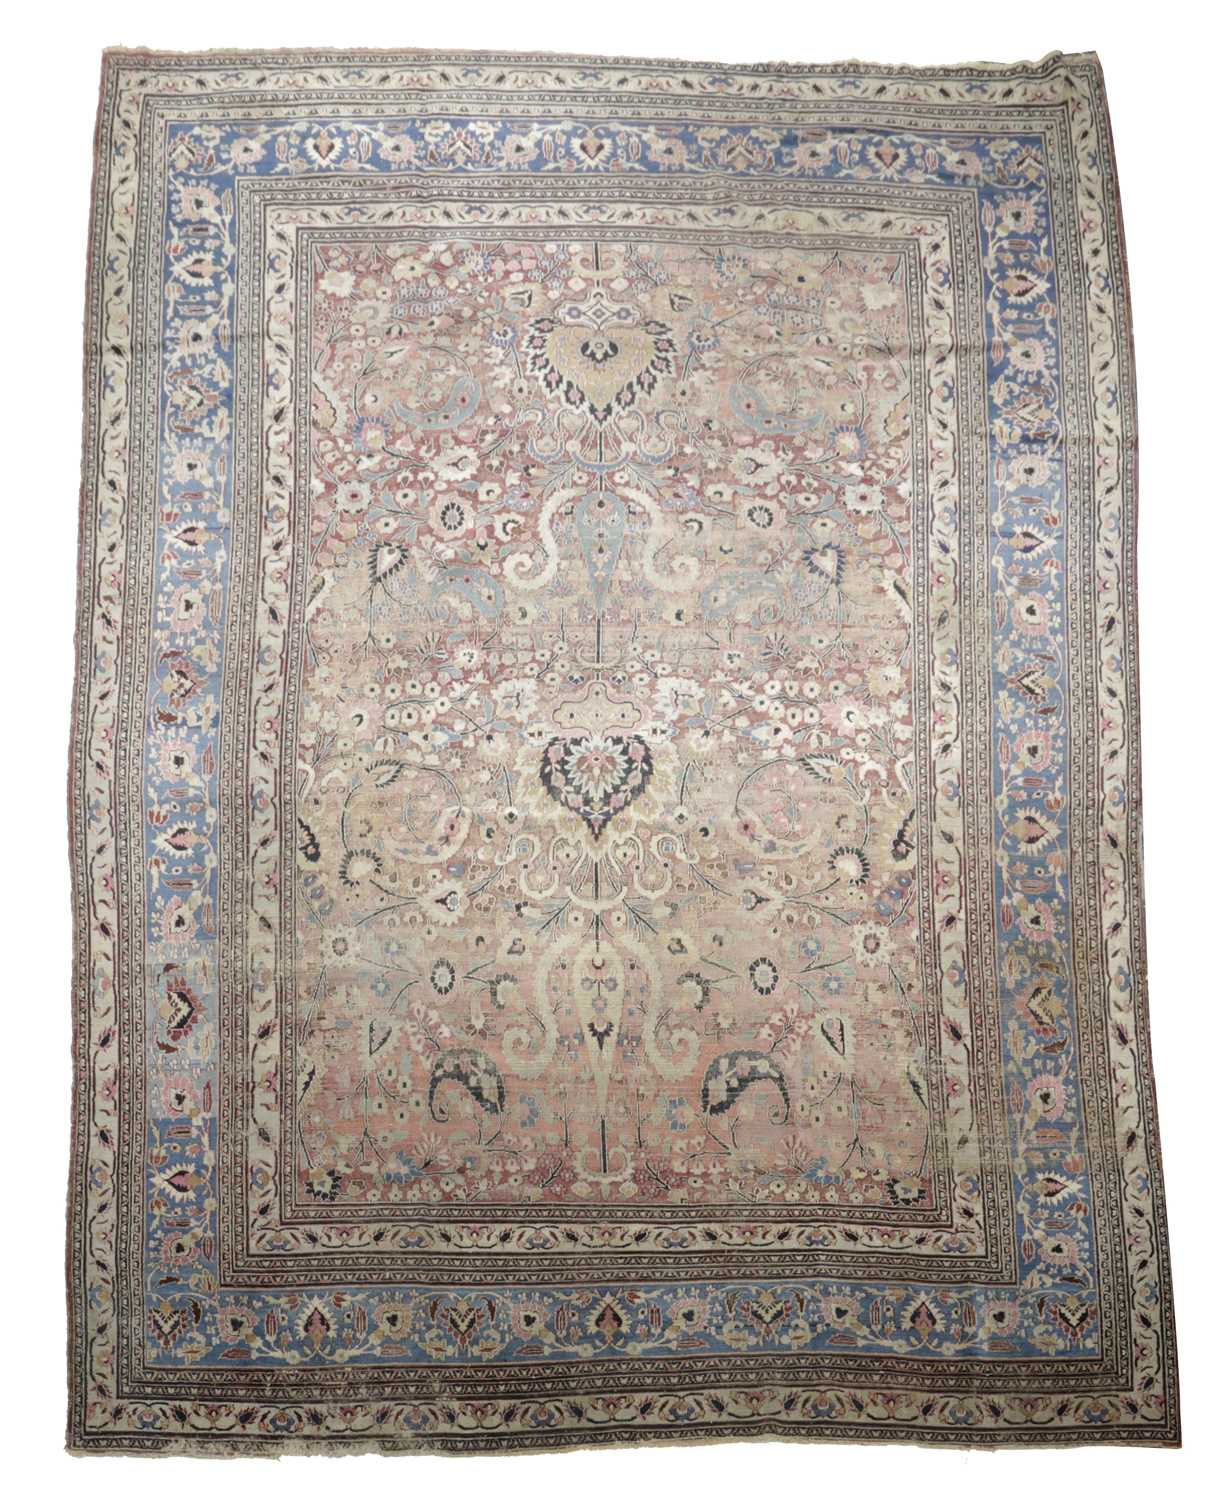 A MASHAD CARPET NORTH EAST KHORASAN, LATE 19TH CENTURY the raspberry field with flowers and vines